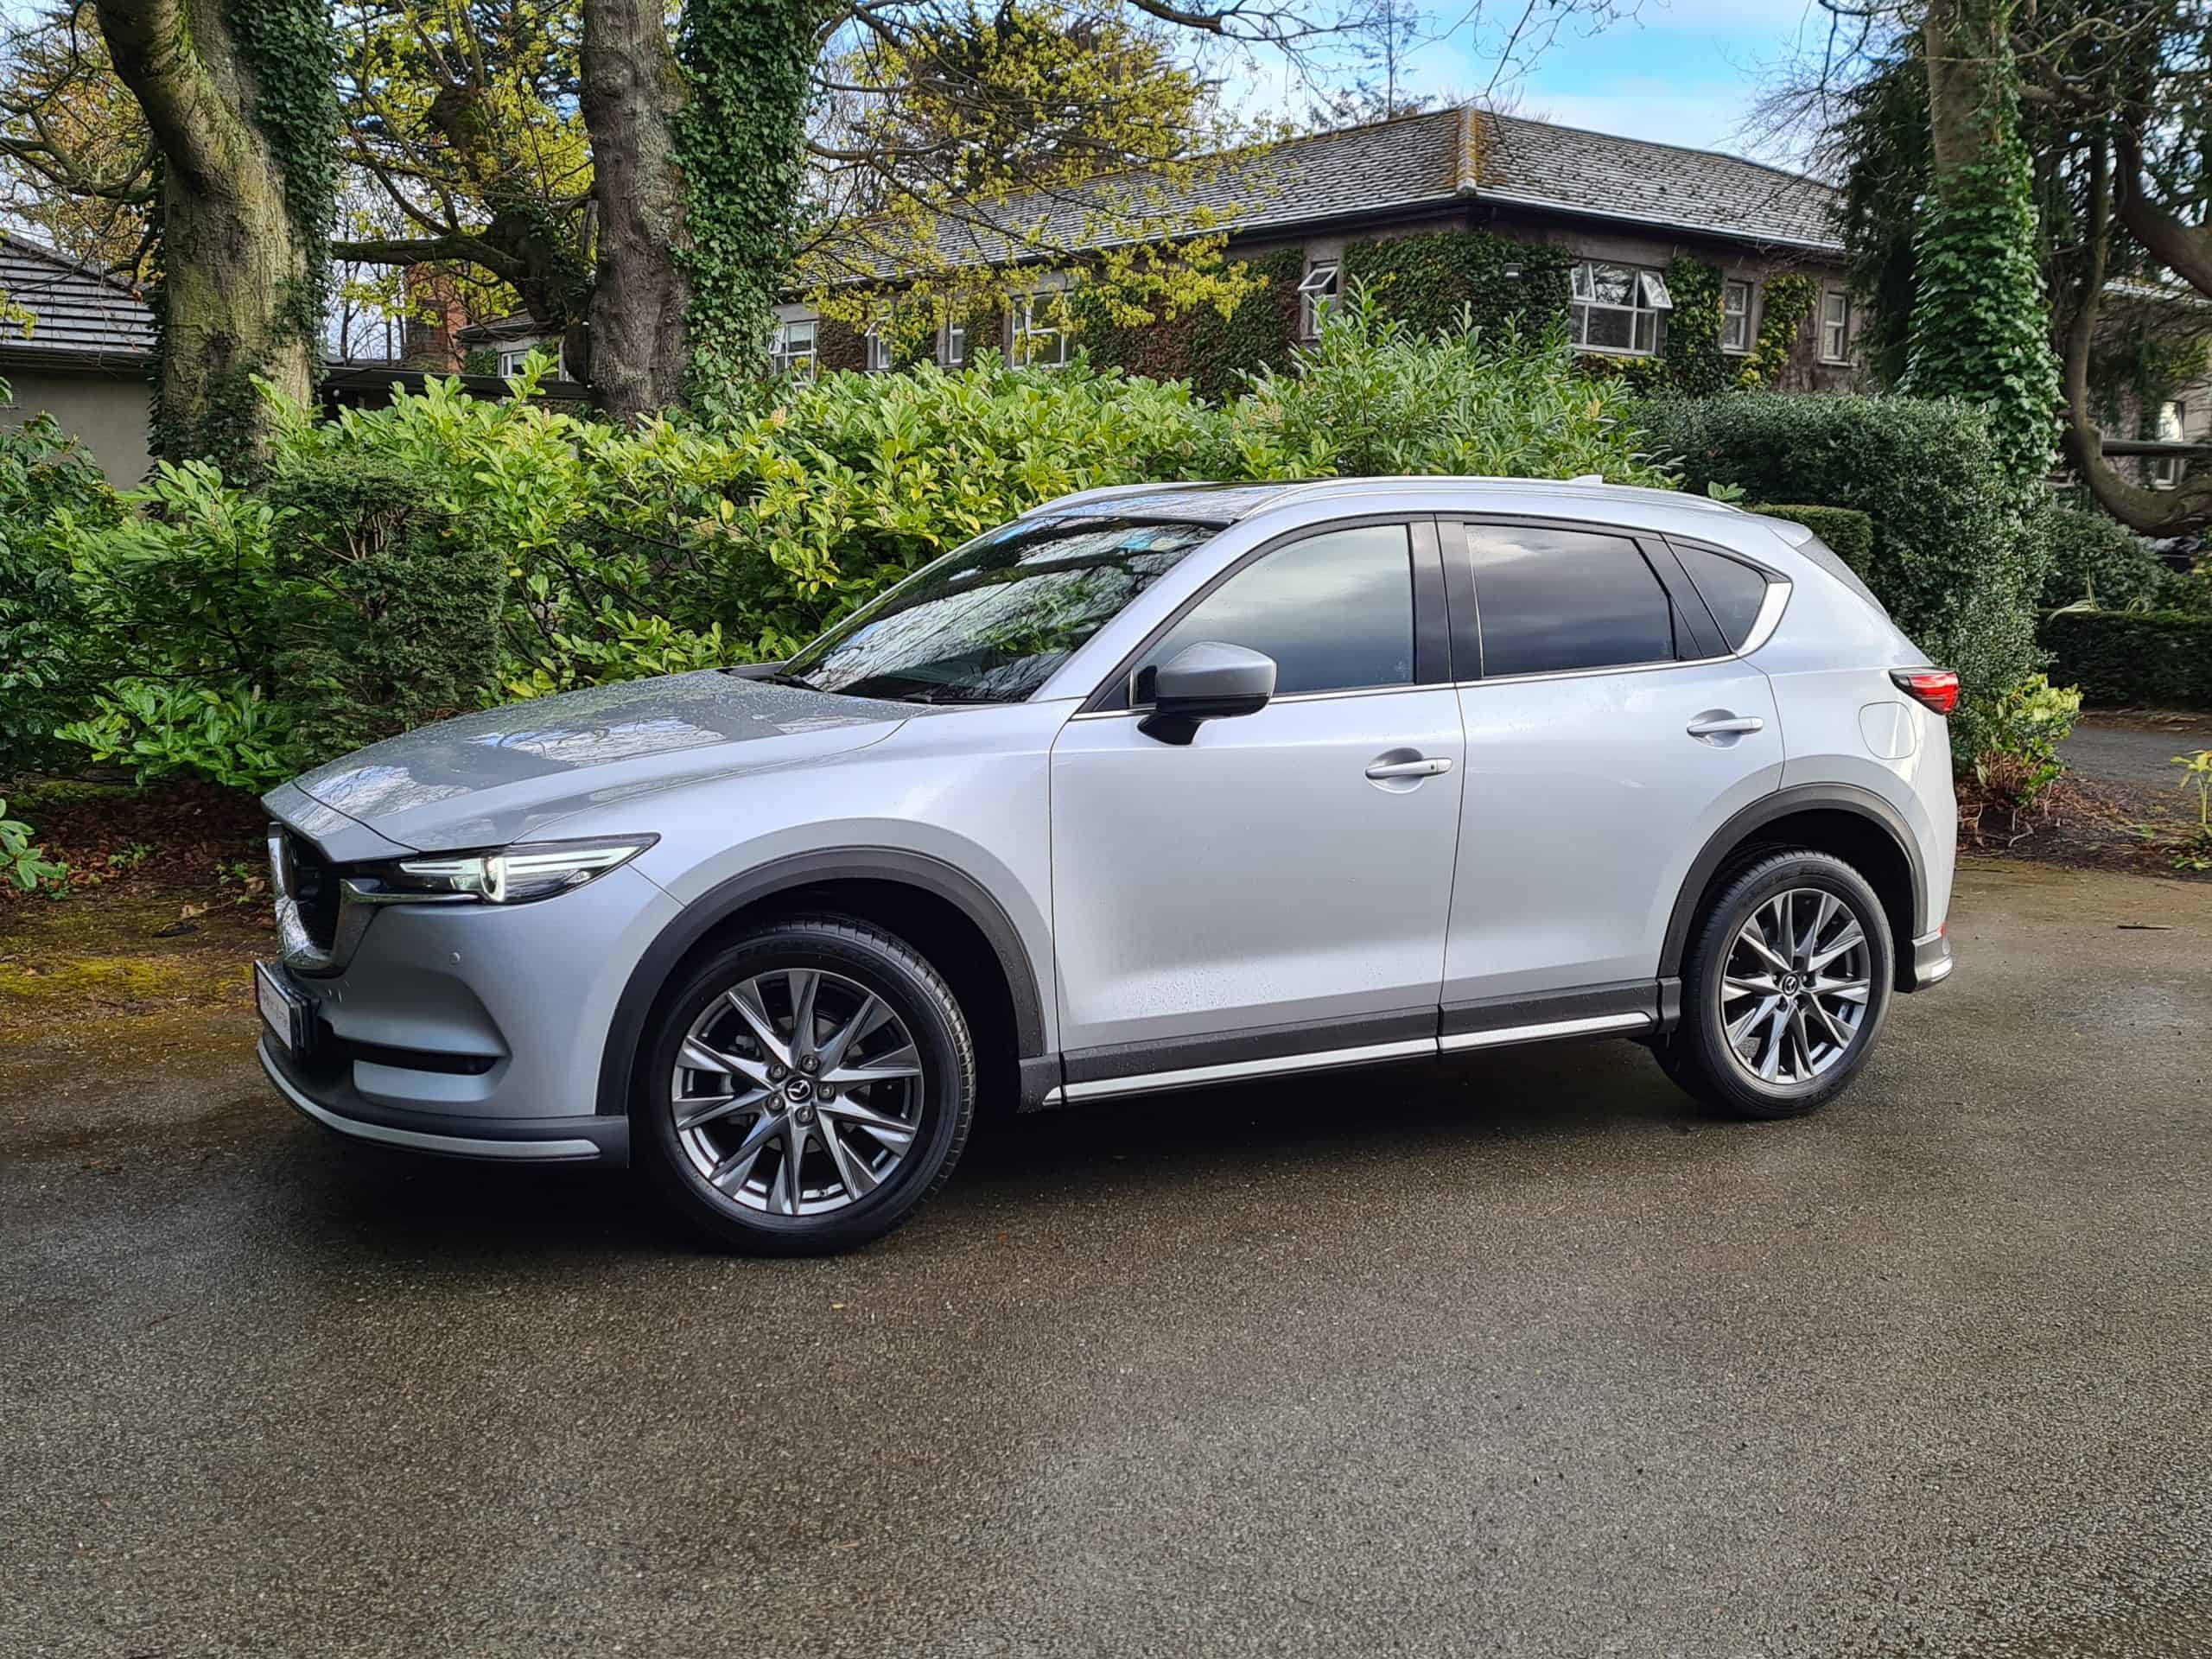 The Ultimate Mid-Size SUV - MAZDA CX-5 | Motoring Matters